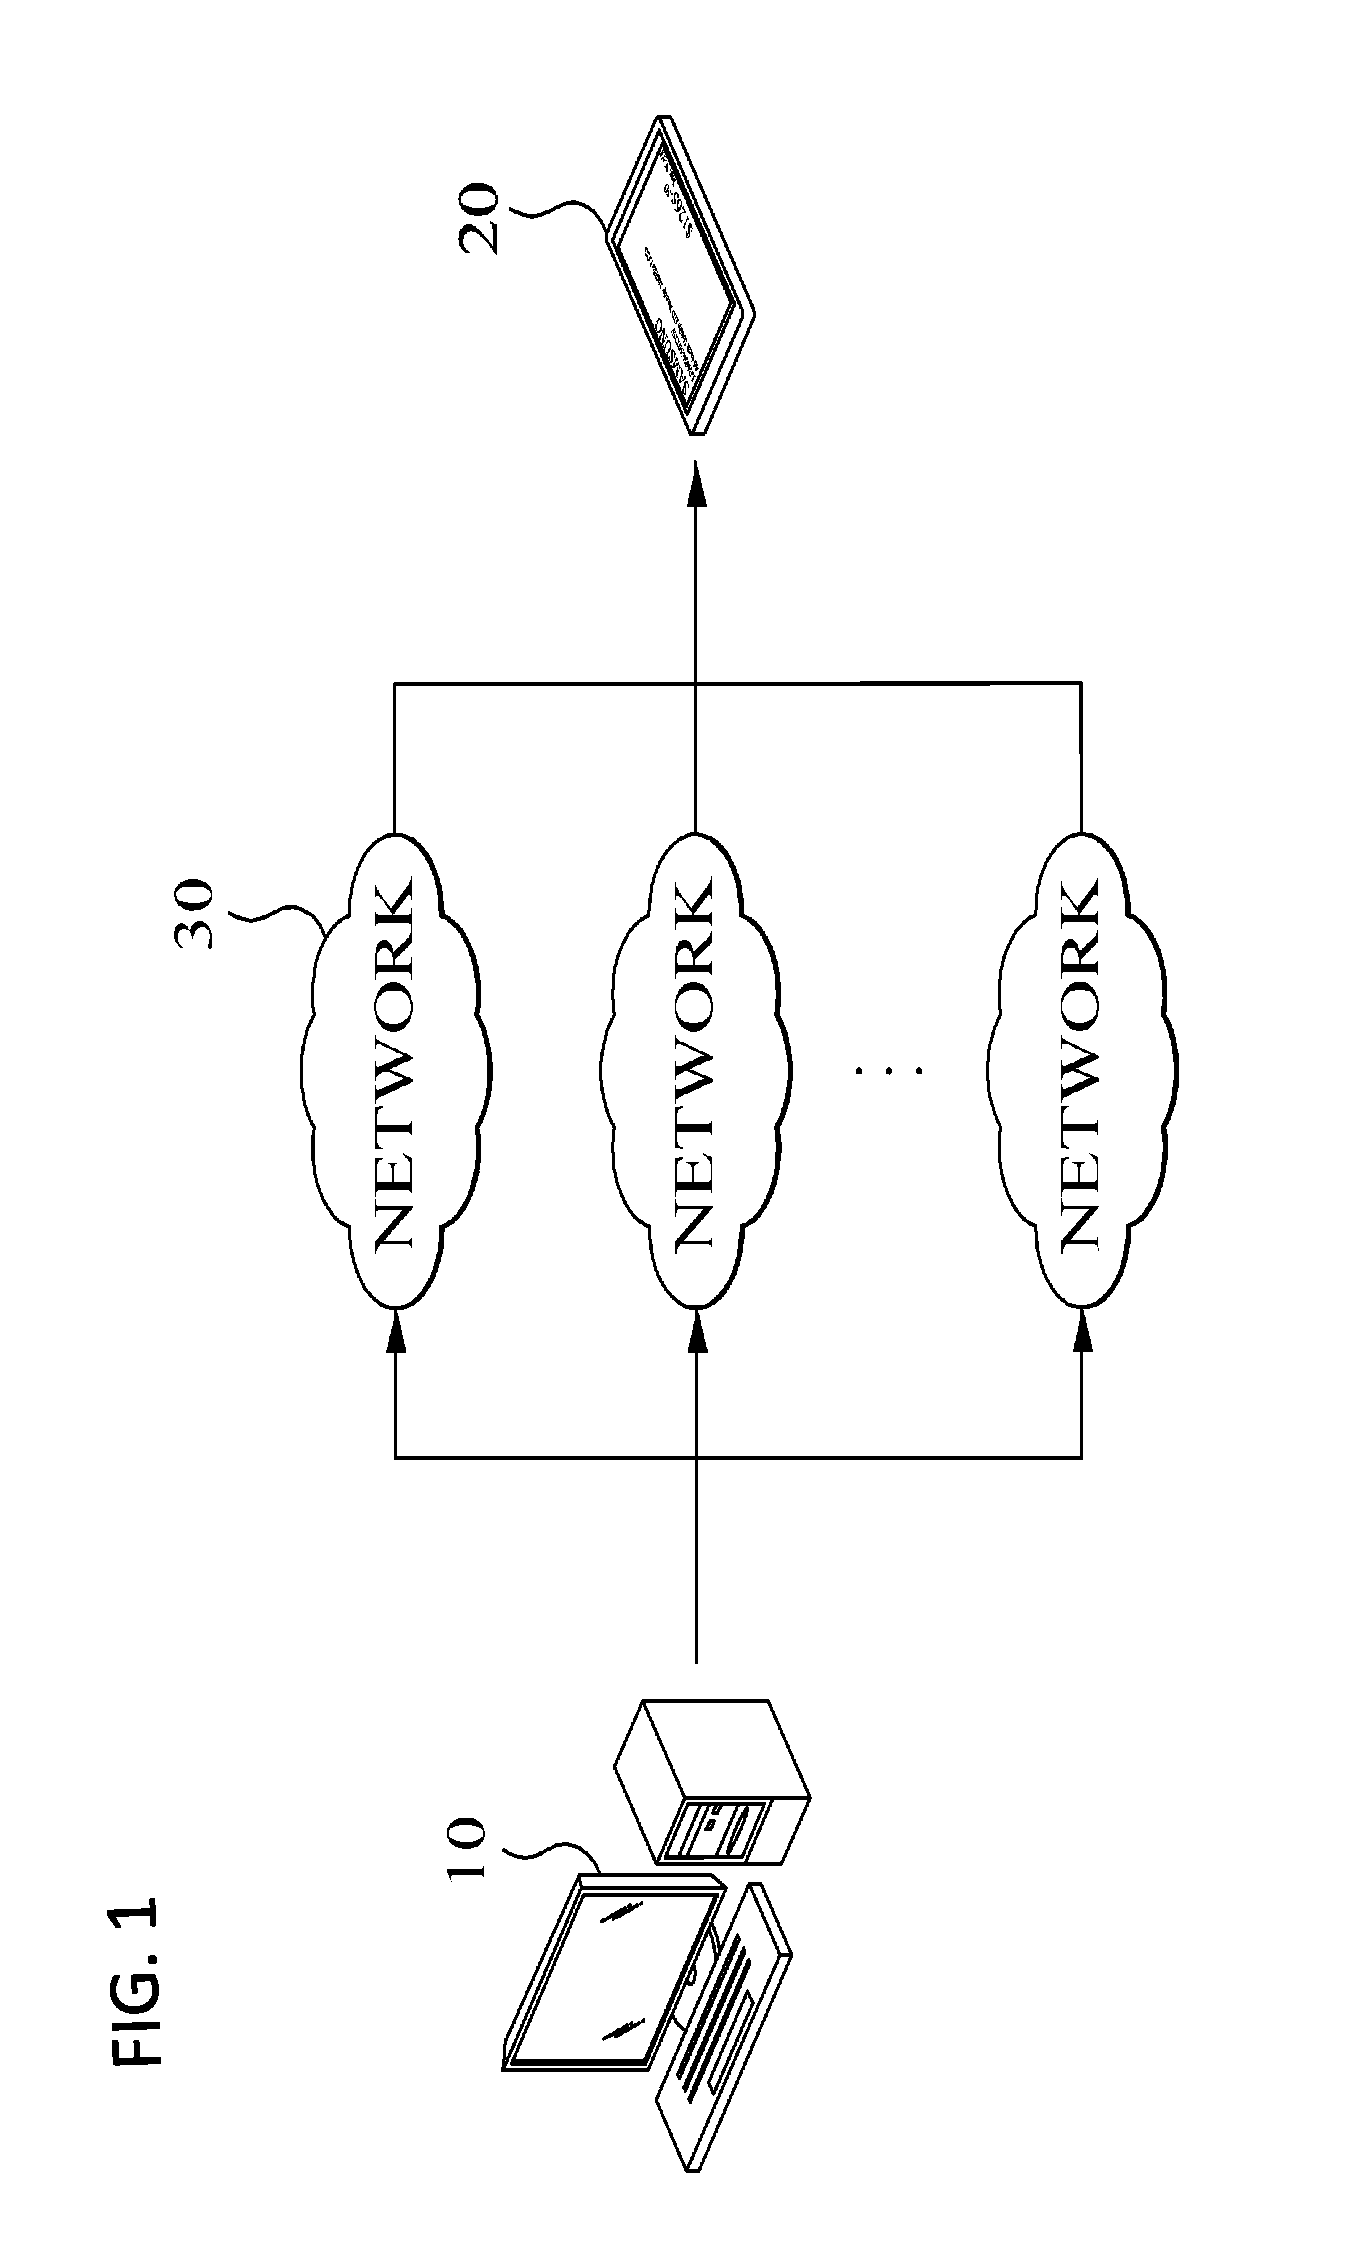 Apparatus and method for transmitting packets through multi-homing based network